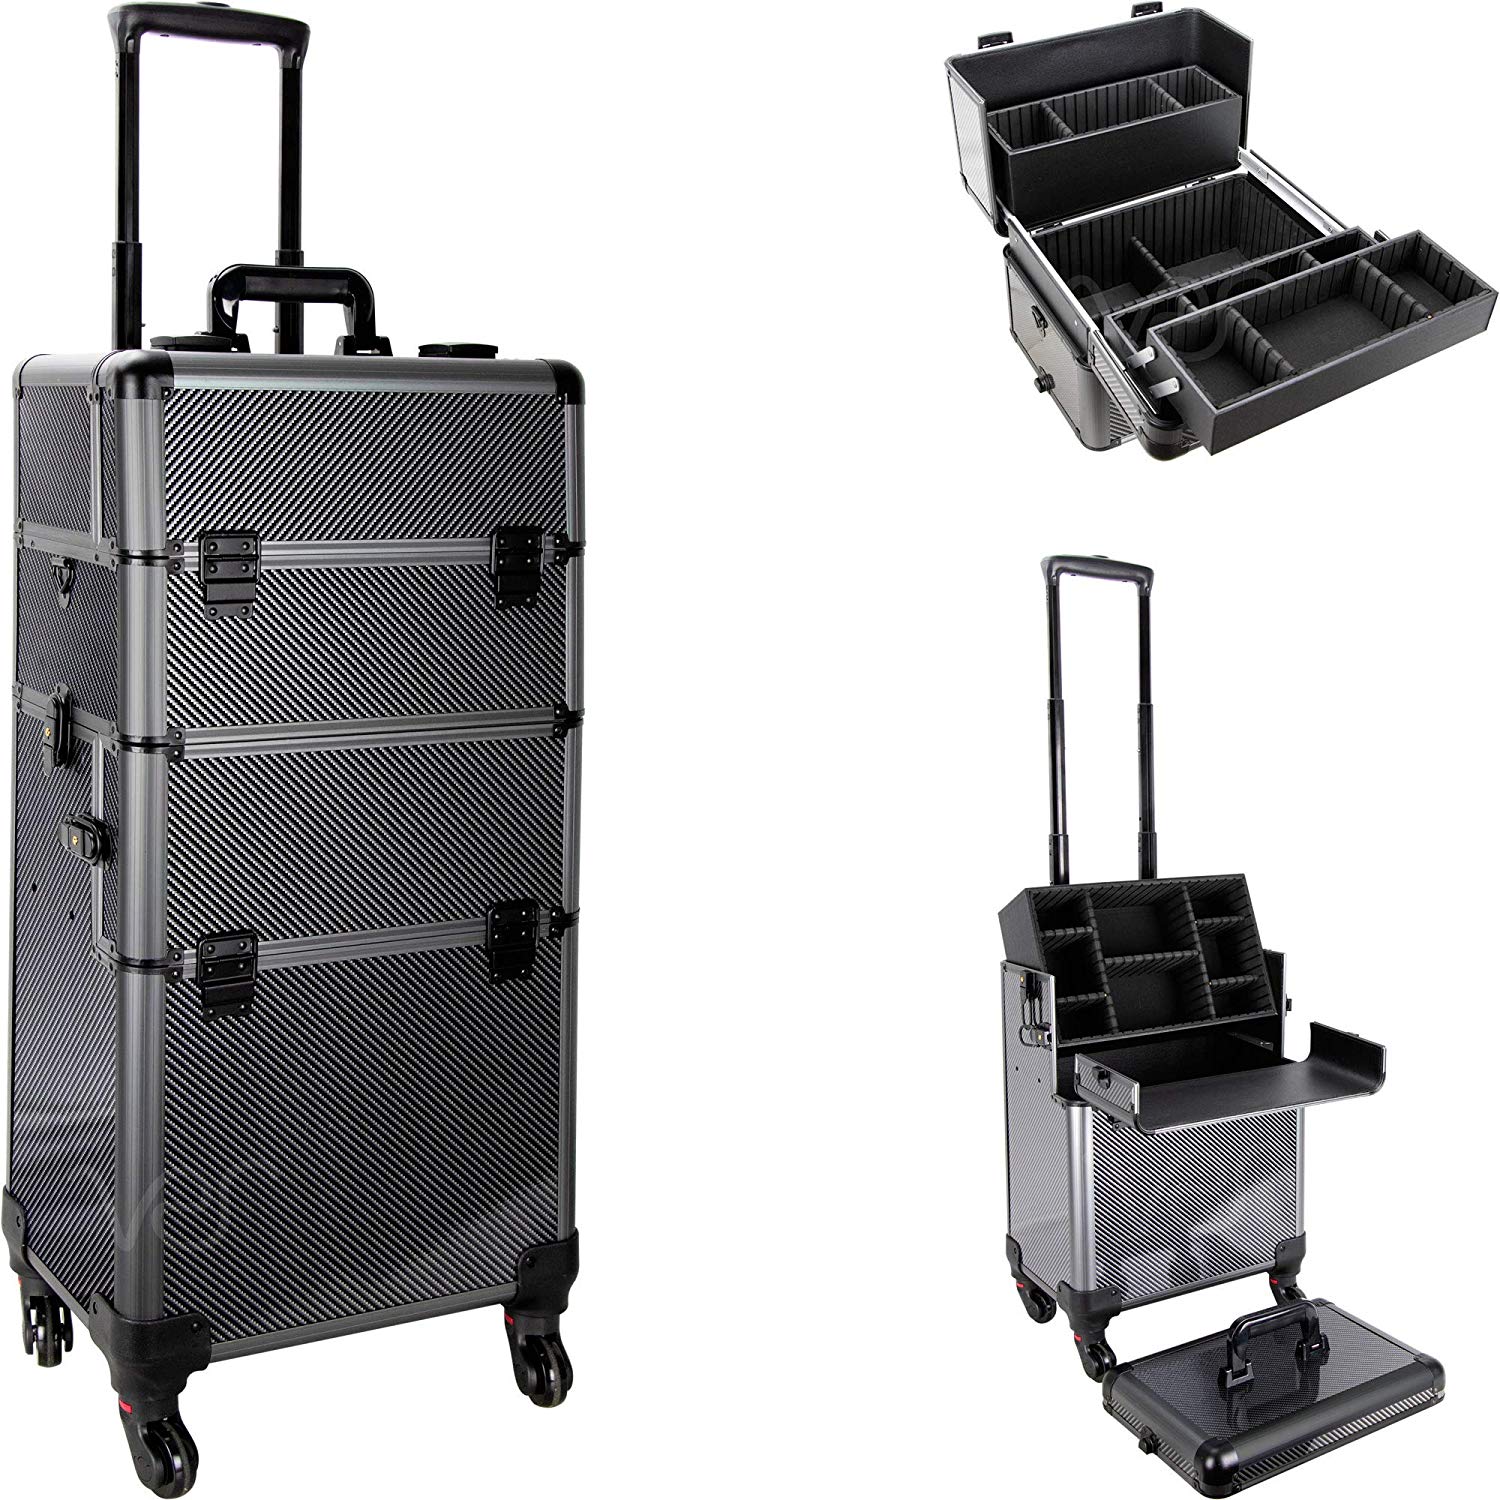 Empty Aluminum Case For Airbrushes & Art Supplies — TCP Global